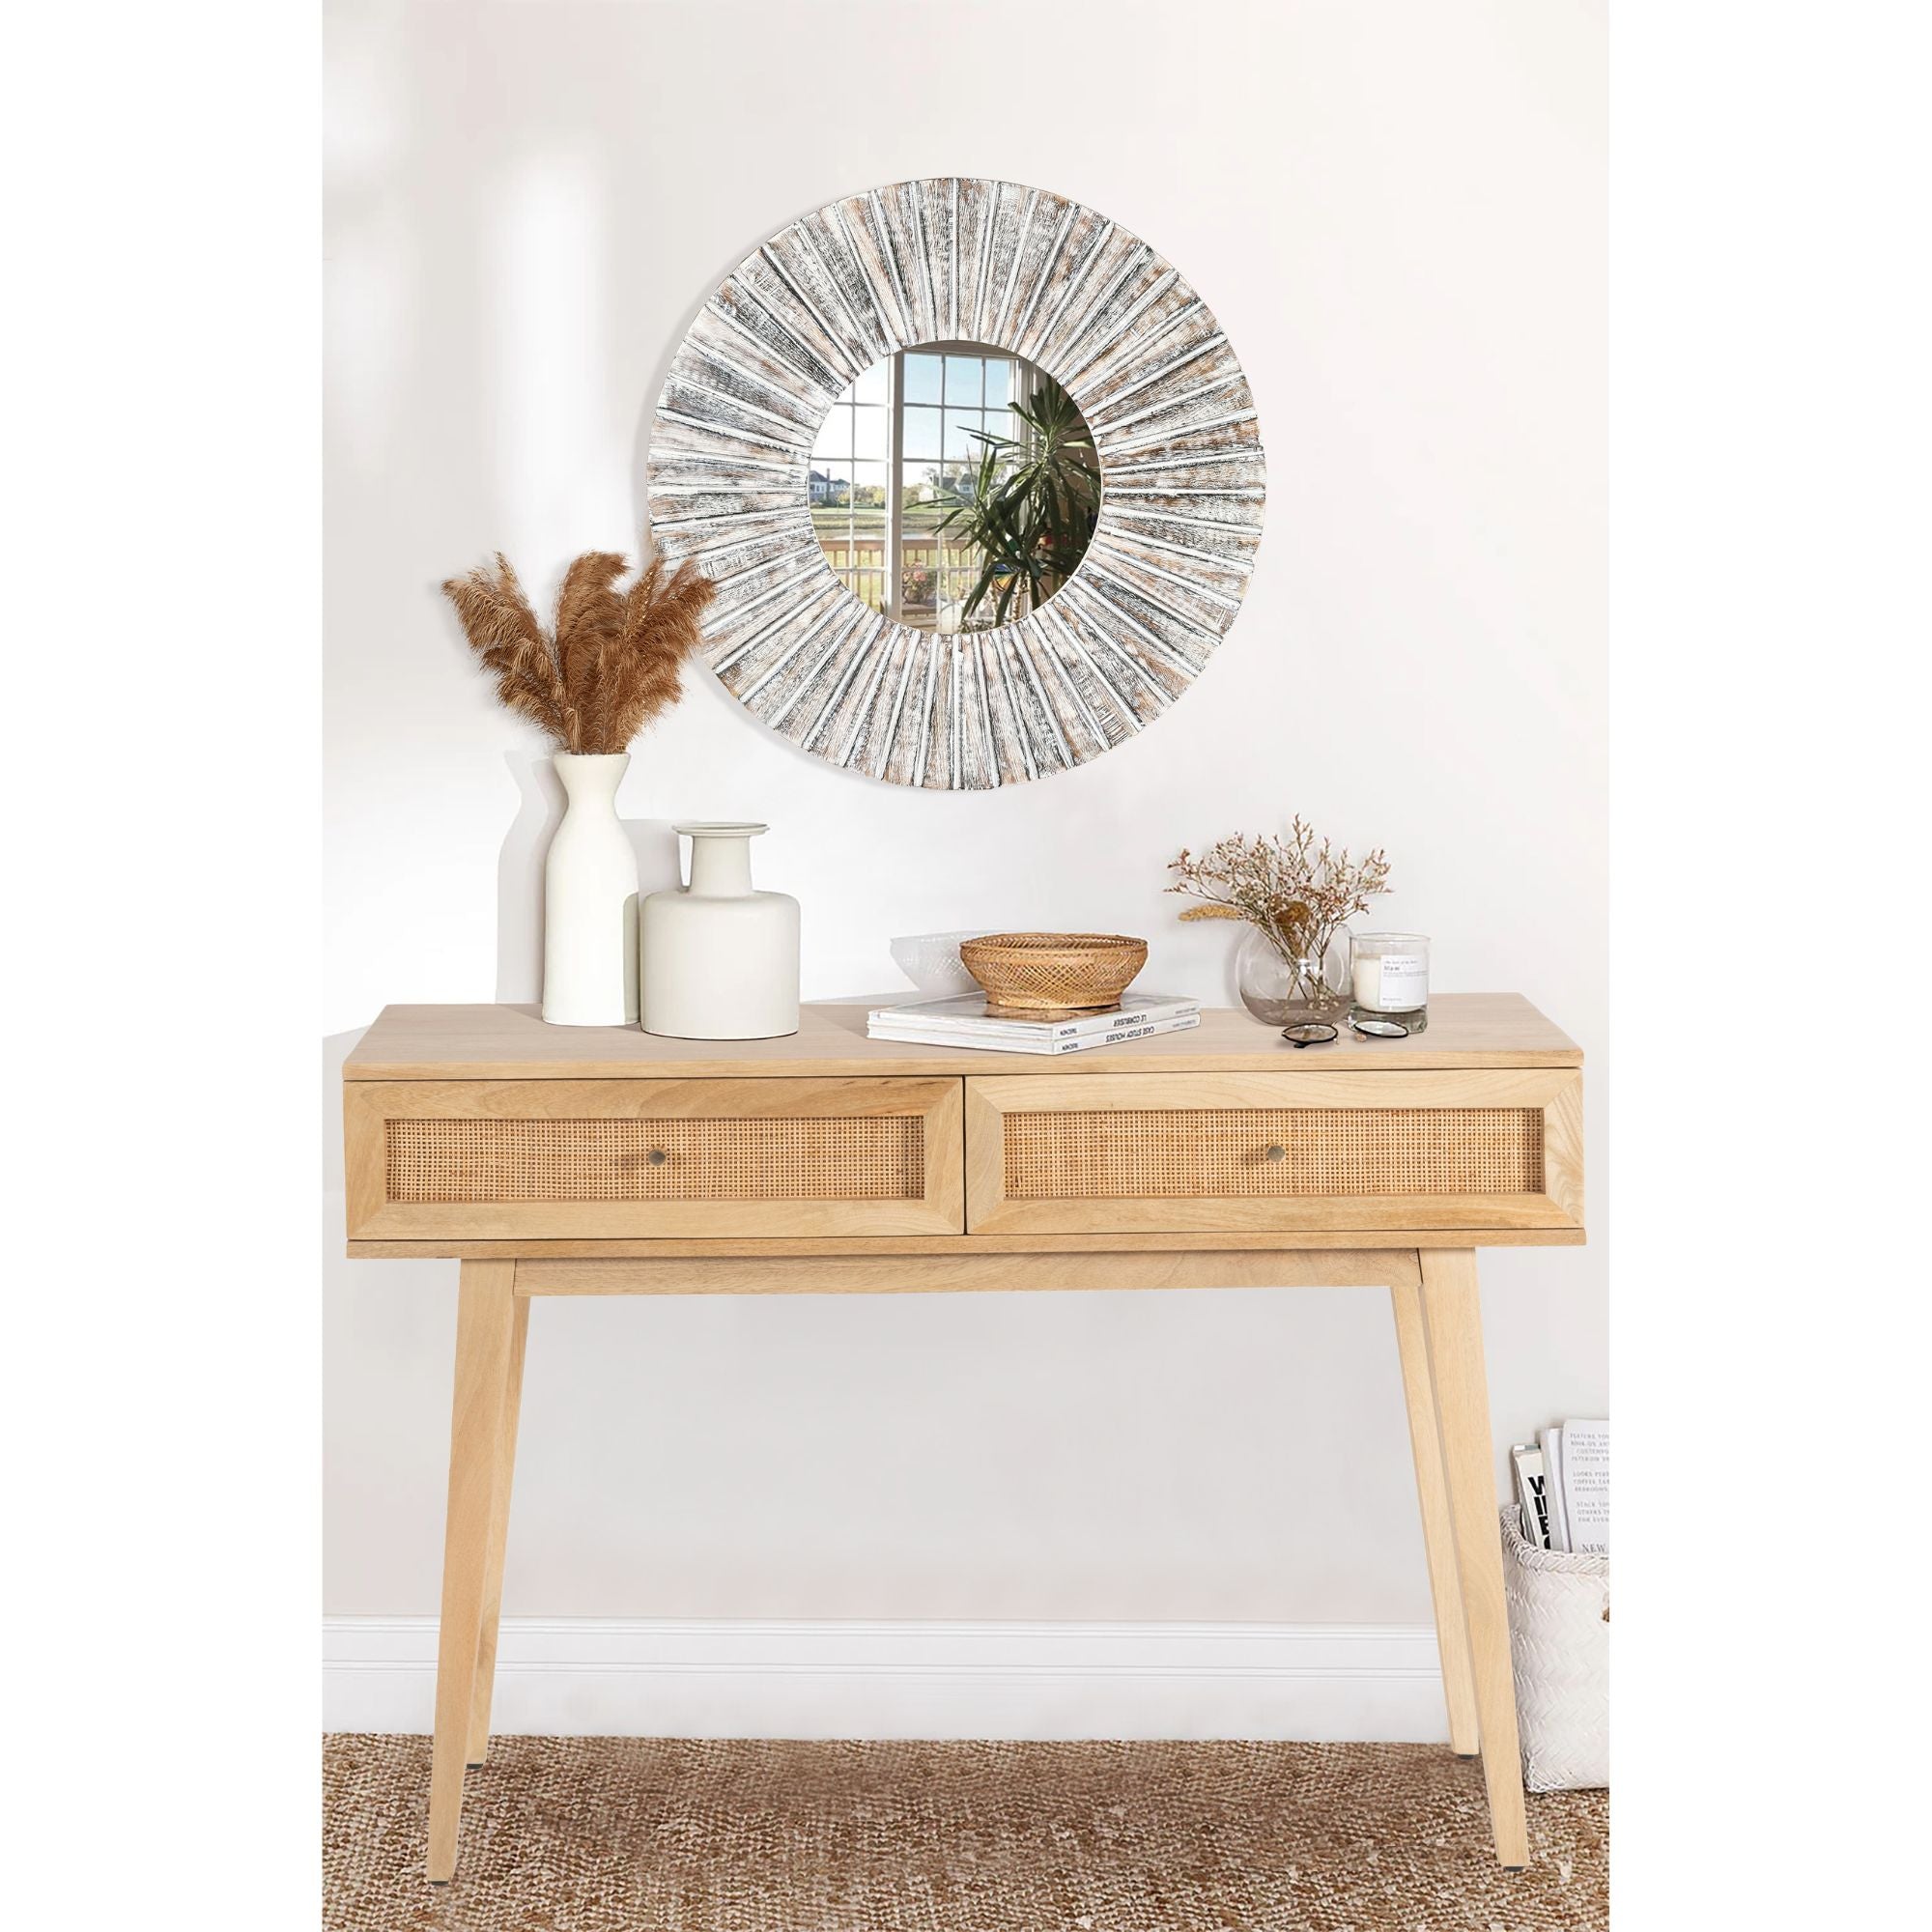 Image of Newhaven  Console Table 110Cm Solid Mango Timber Wood Rattan Furniture Natural